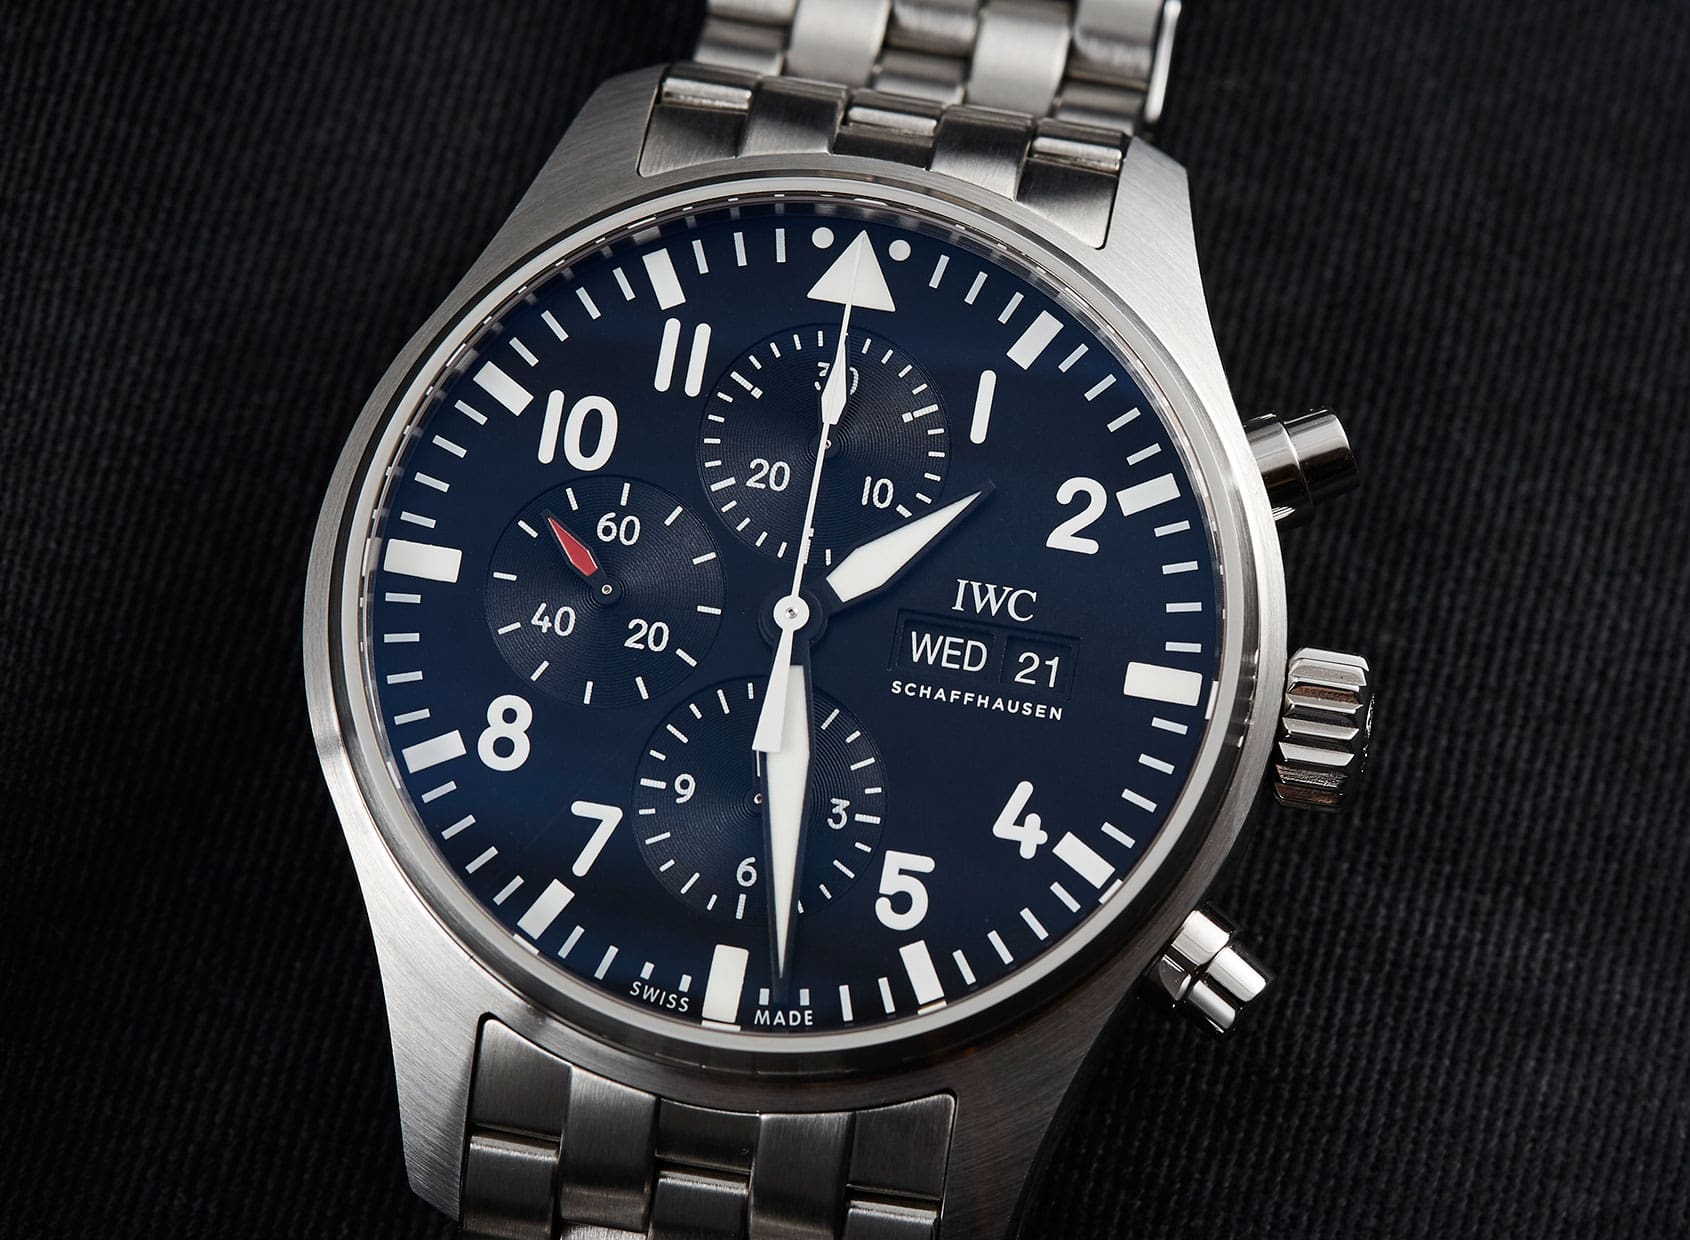 EDITOR’S PICK: The IWC Pilot’s Chronograph – one of the classics